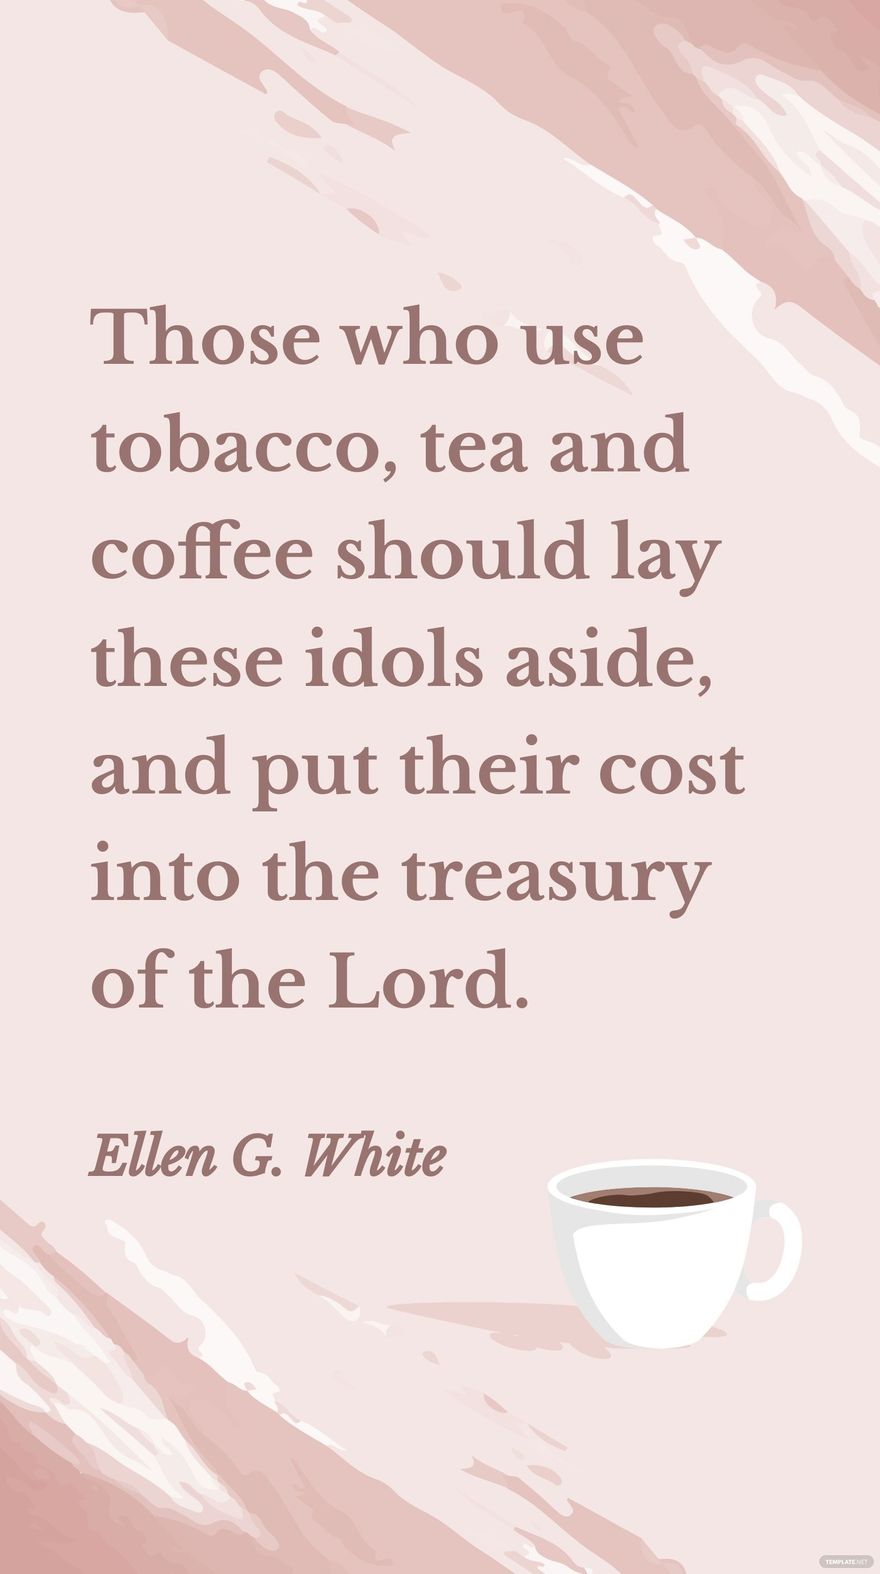 Ellen G. White - Those who use tobacco, tea and coffee should lay these idols aside, and put their cost into the treasury of the Lord.